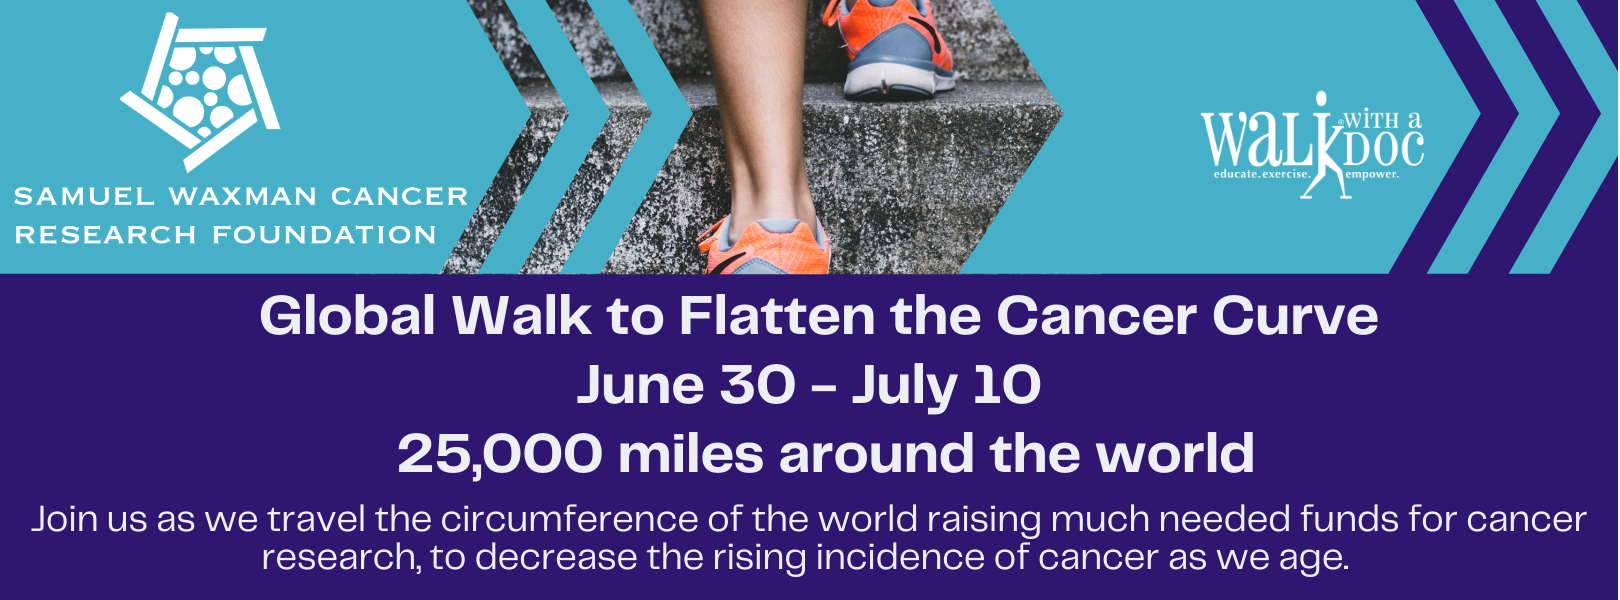 The 2021 Global Walk to Flatten the Cancer Curve